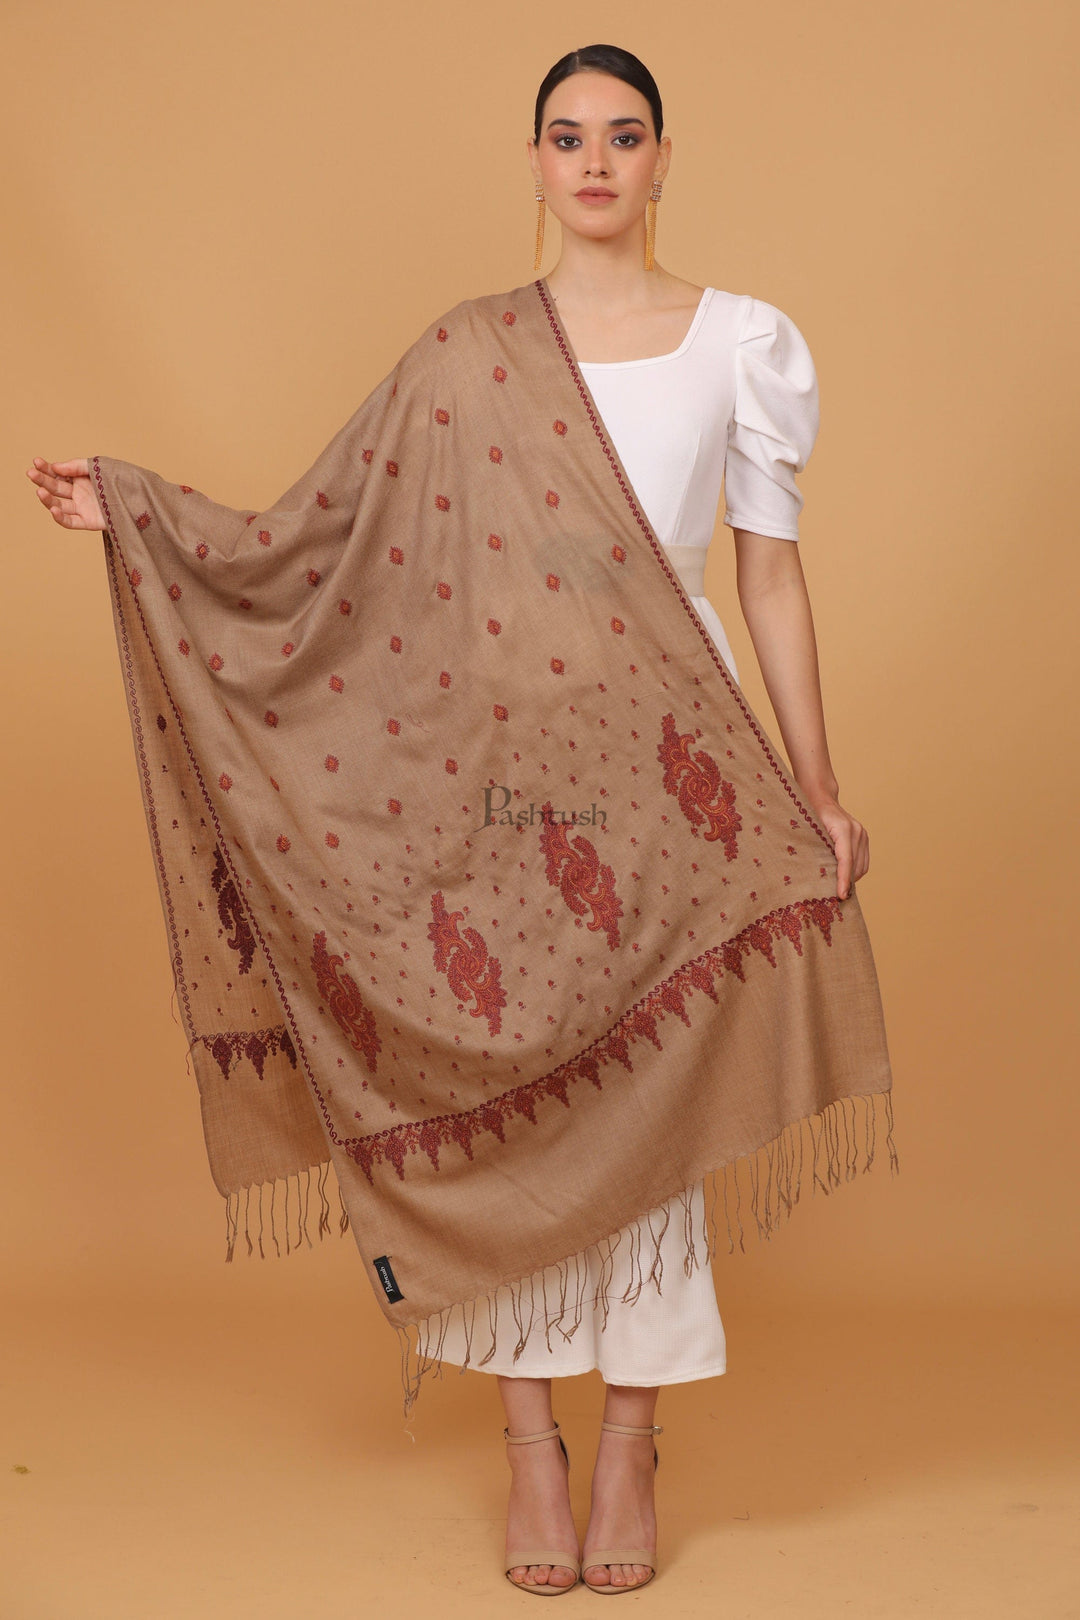 Pashtush India Womens Stoles and Scarves Scarf Pashtush womens Fine Wool stole, booti design, Taupe